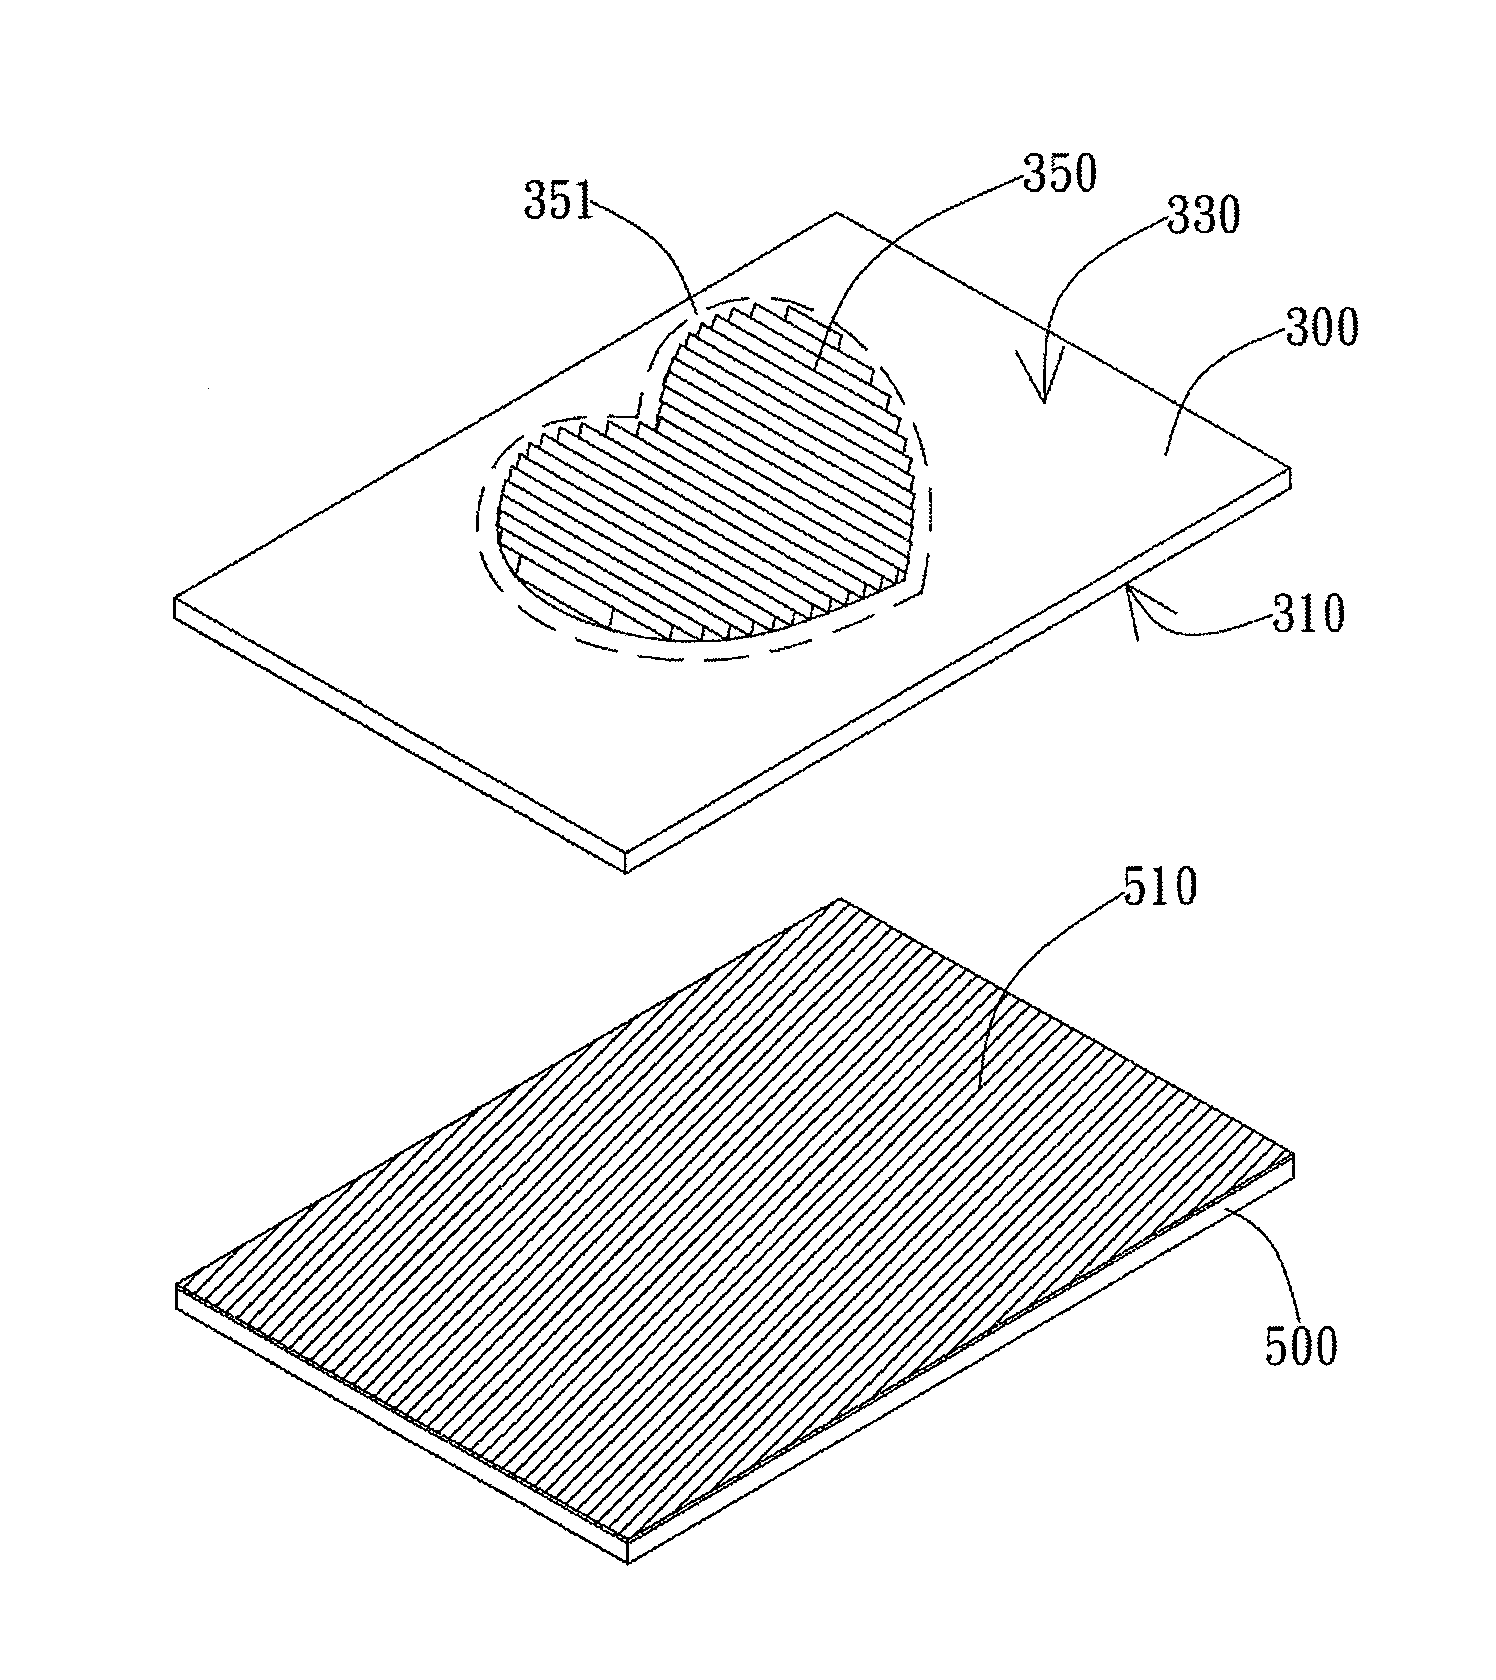 Decoration plate and electronic device using the same